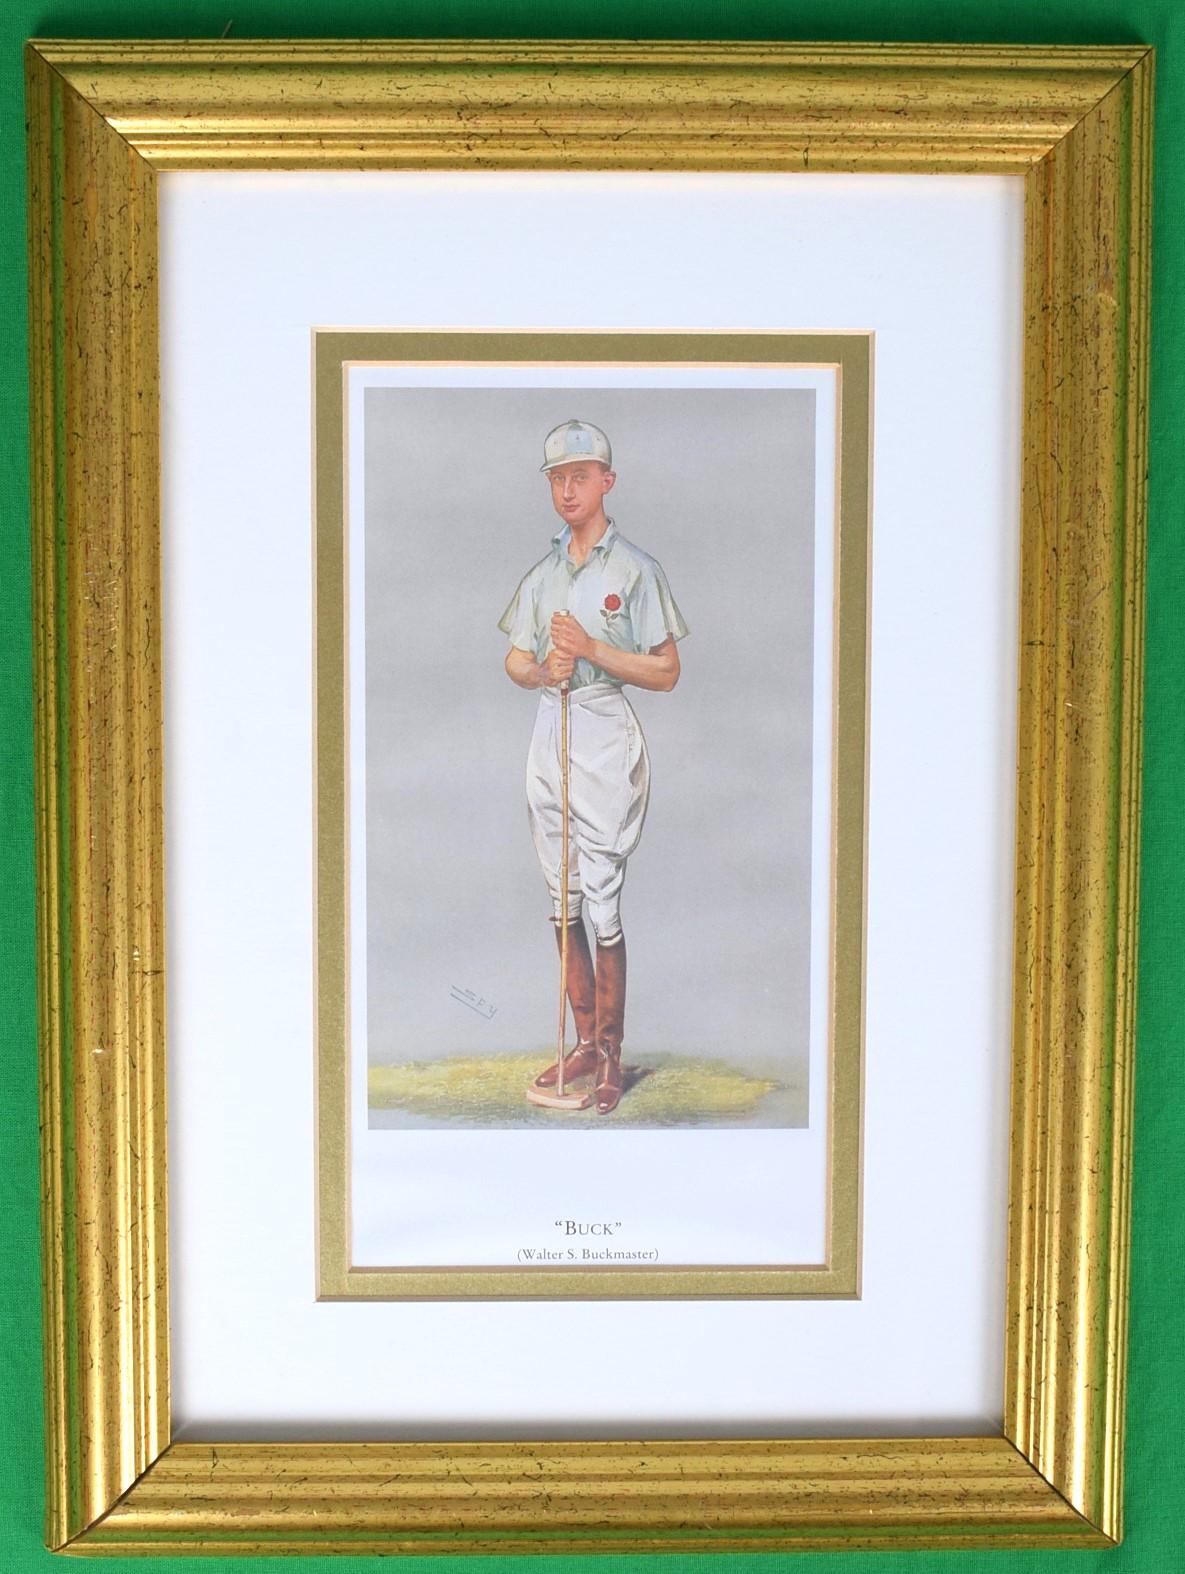 Print Sz: 8 1/2"H x 4 1/2"W

Frame Sz: 14 1/2"H x 10 5/8"W

Walter Selby Buckmaster (16 October 1872 – 30 October 1942) was a British polo player in the 1900 Summer Olympics and in the 1908 Summer Olympics.

Biography
He was born on 16 October 1872